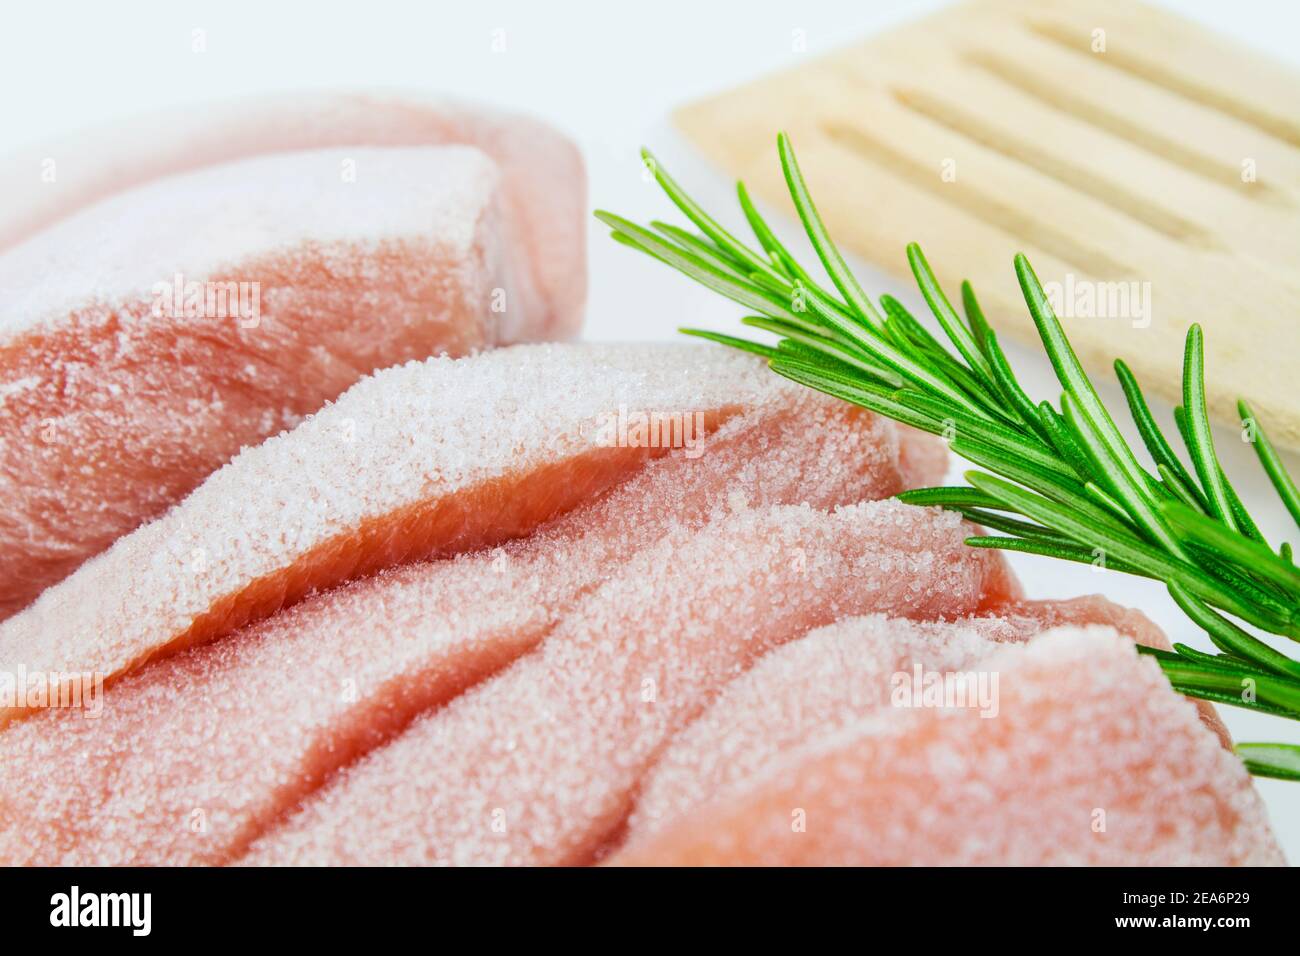 Frozen Poultry and Rosemary close up Stock Photo